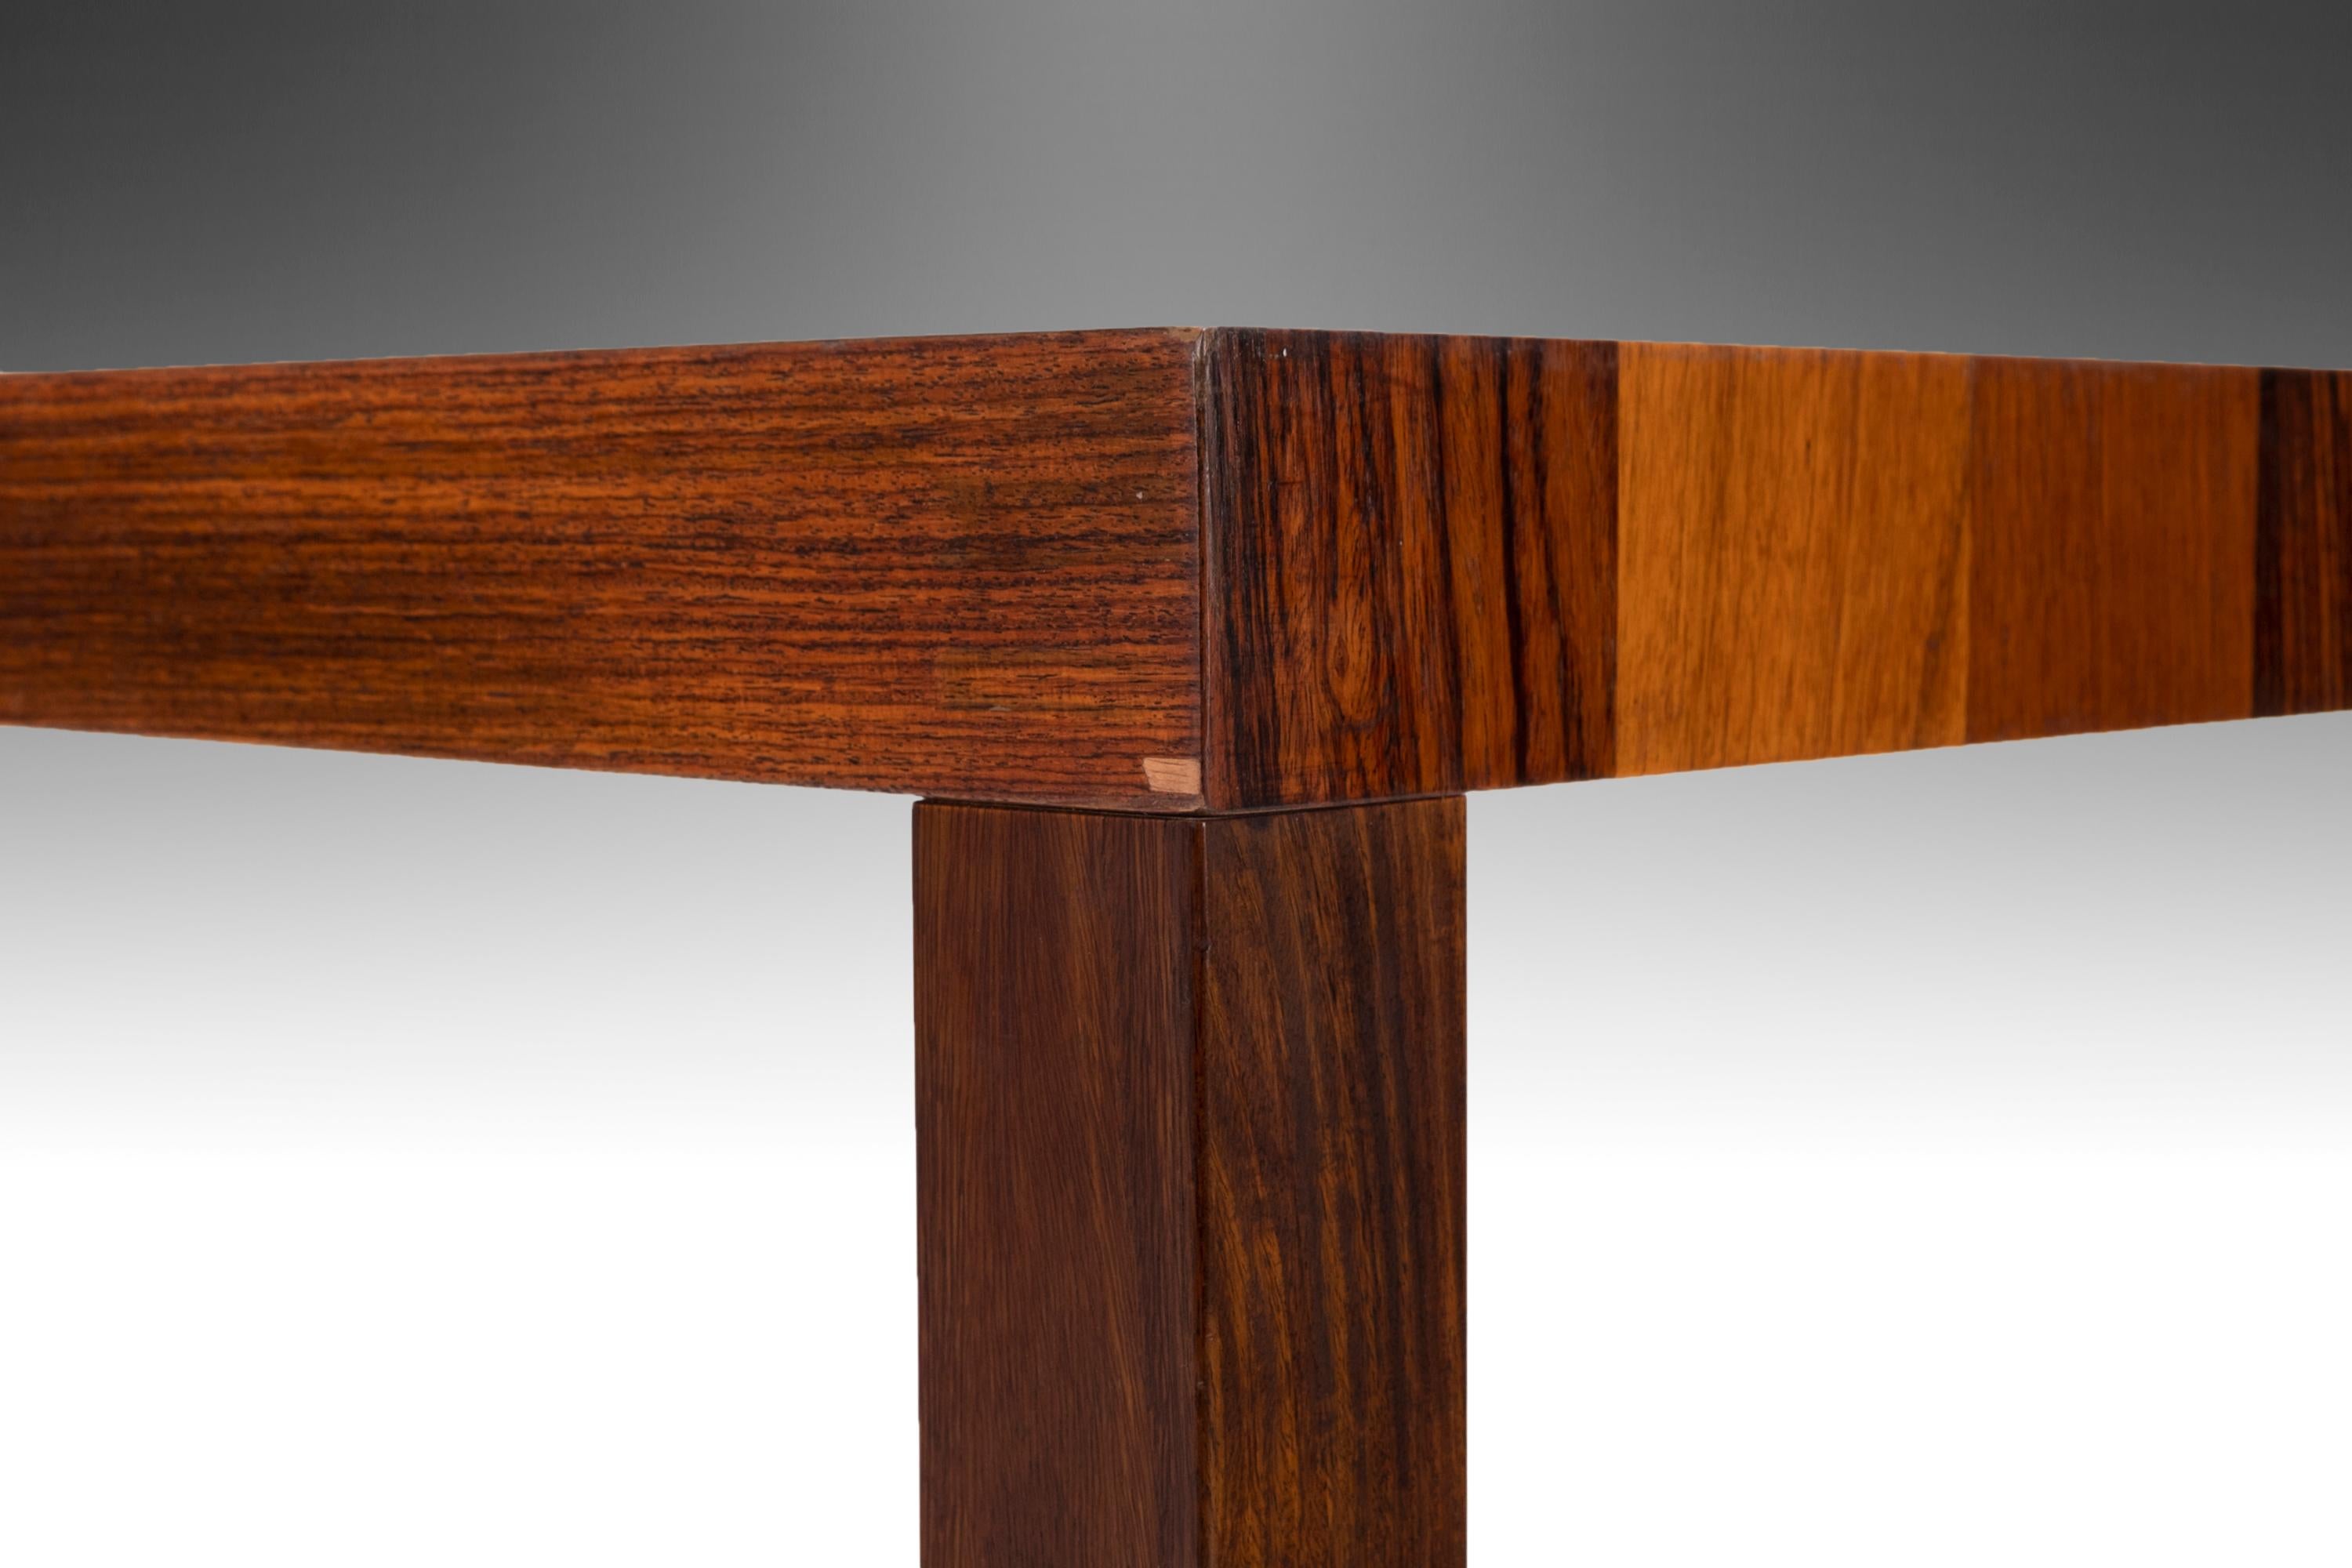 Walnut Parsons Dining Table Attributed to Milo Baughman for Directional, USA, c. 1960's